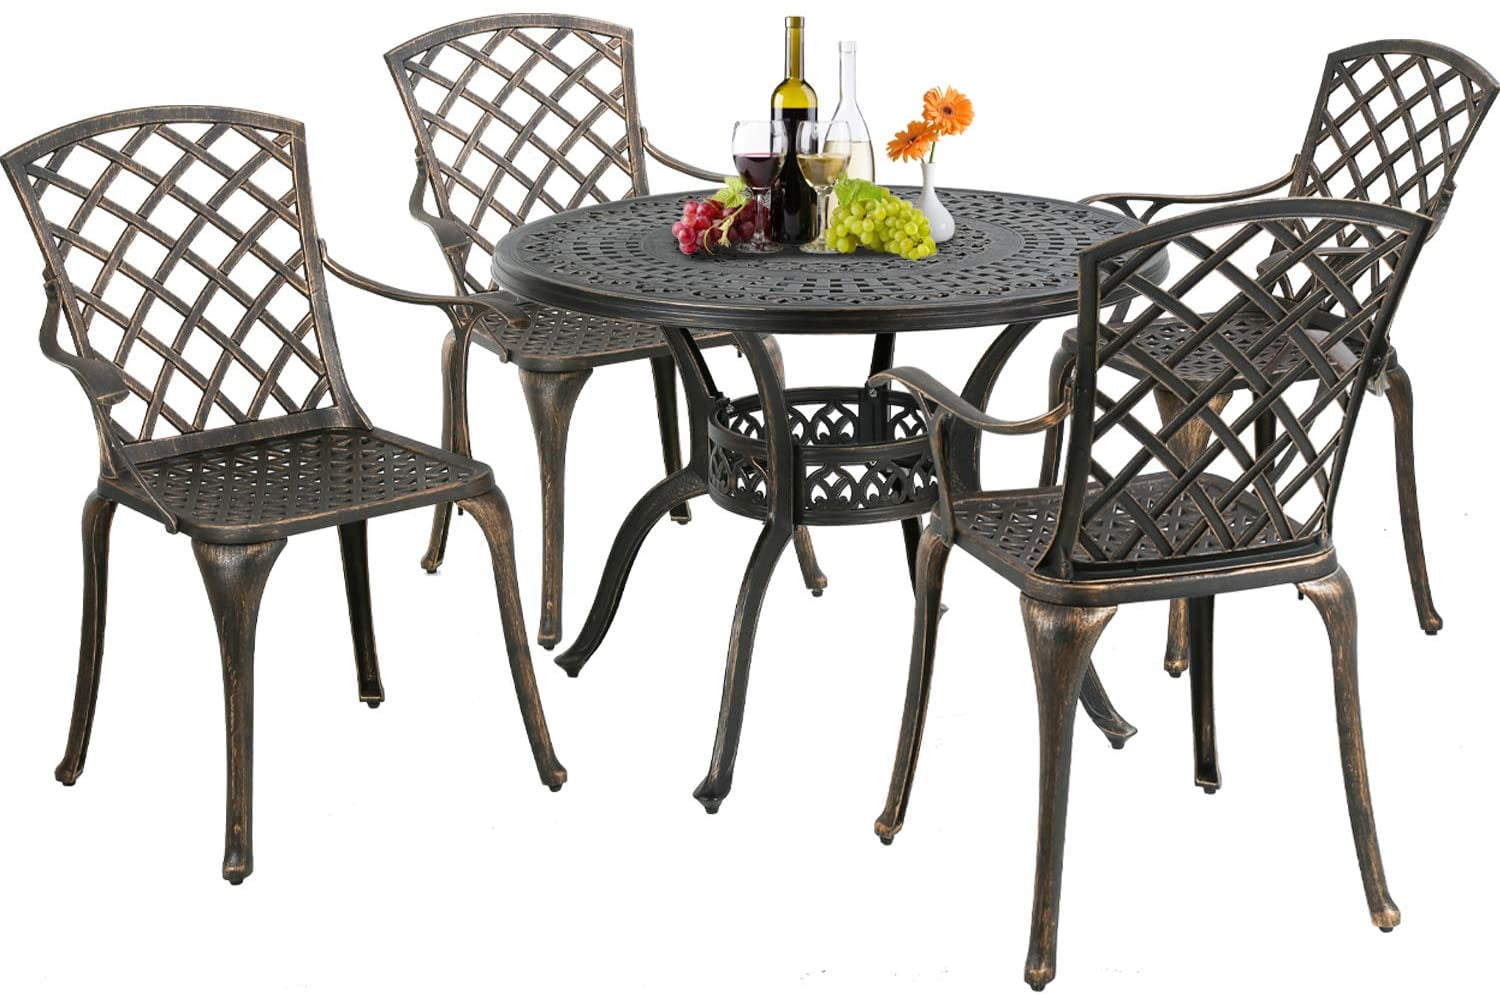 Fdw Patio Dining Set Outdoor Dining Table Set Dining Chairs Set Of 4 Outdoor Dining Set Wrought